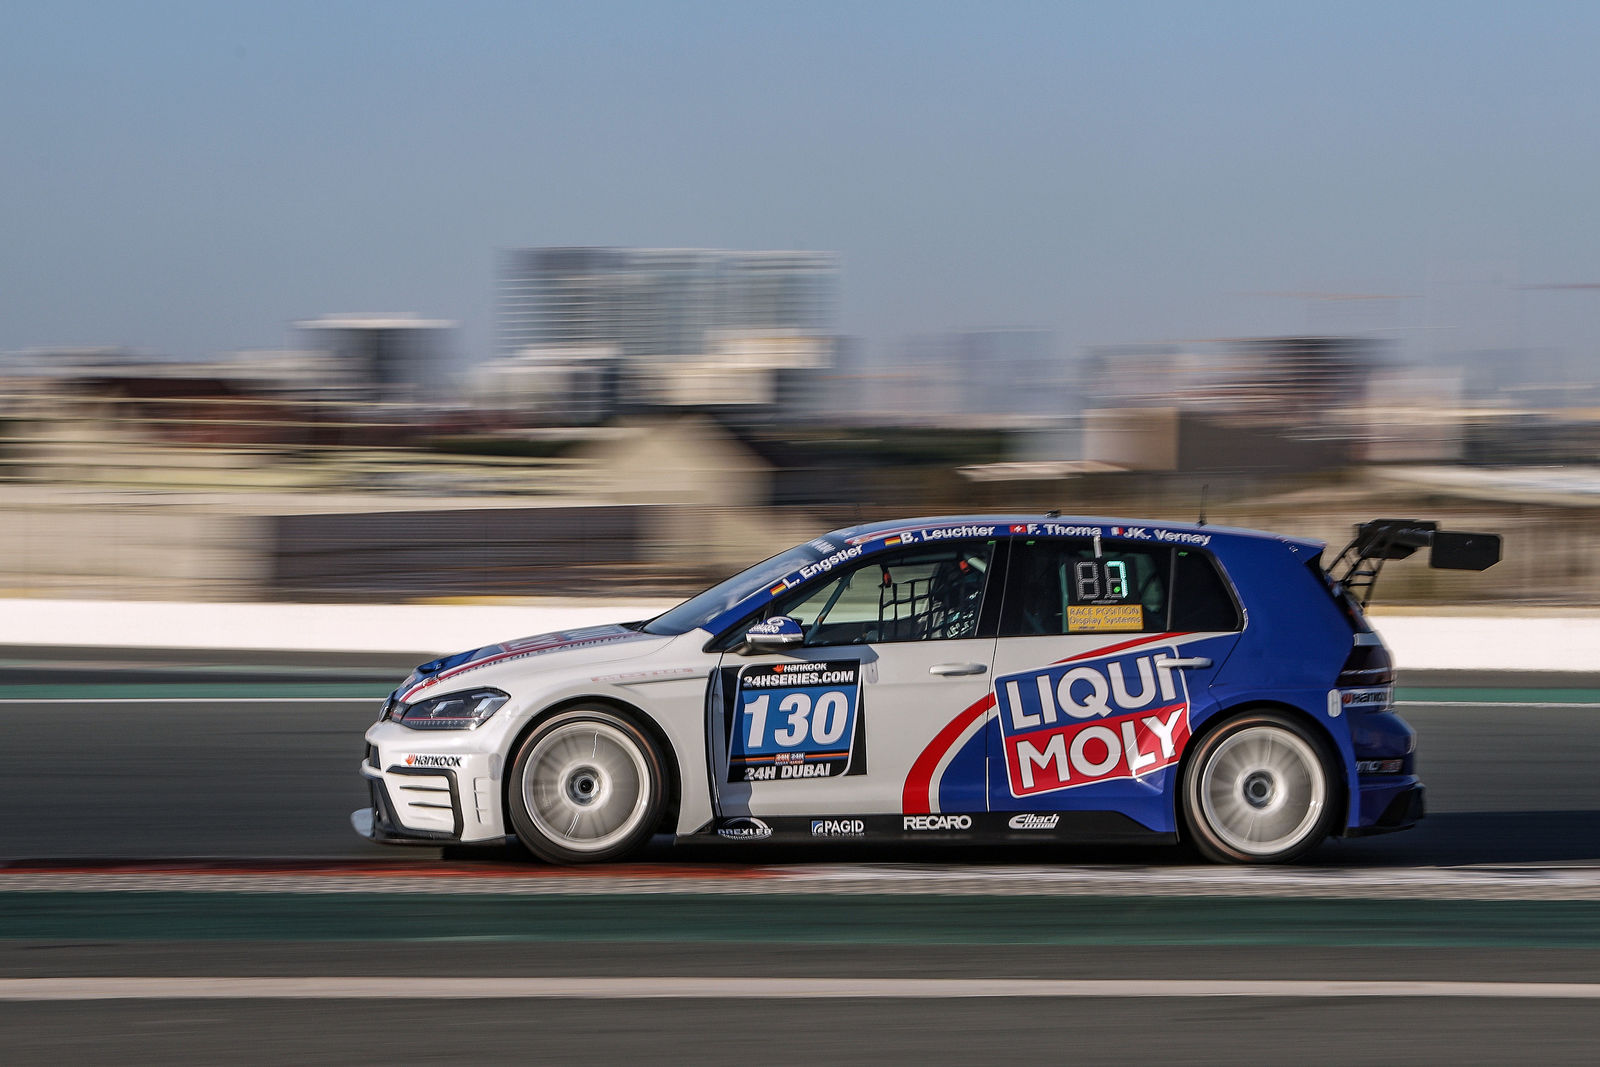 Class victory for Golf GTI TCR at 24h-race in Dubai